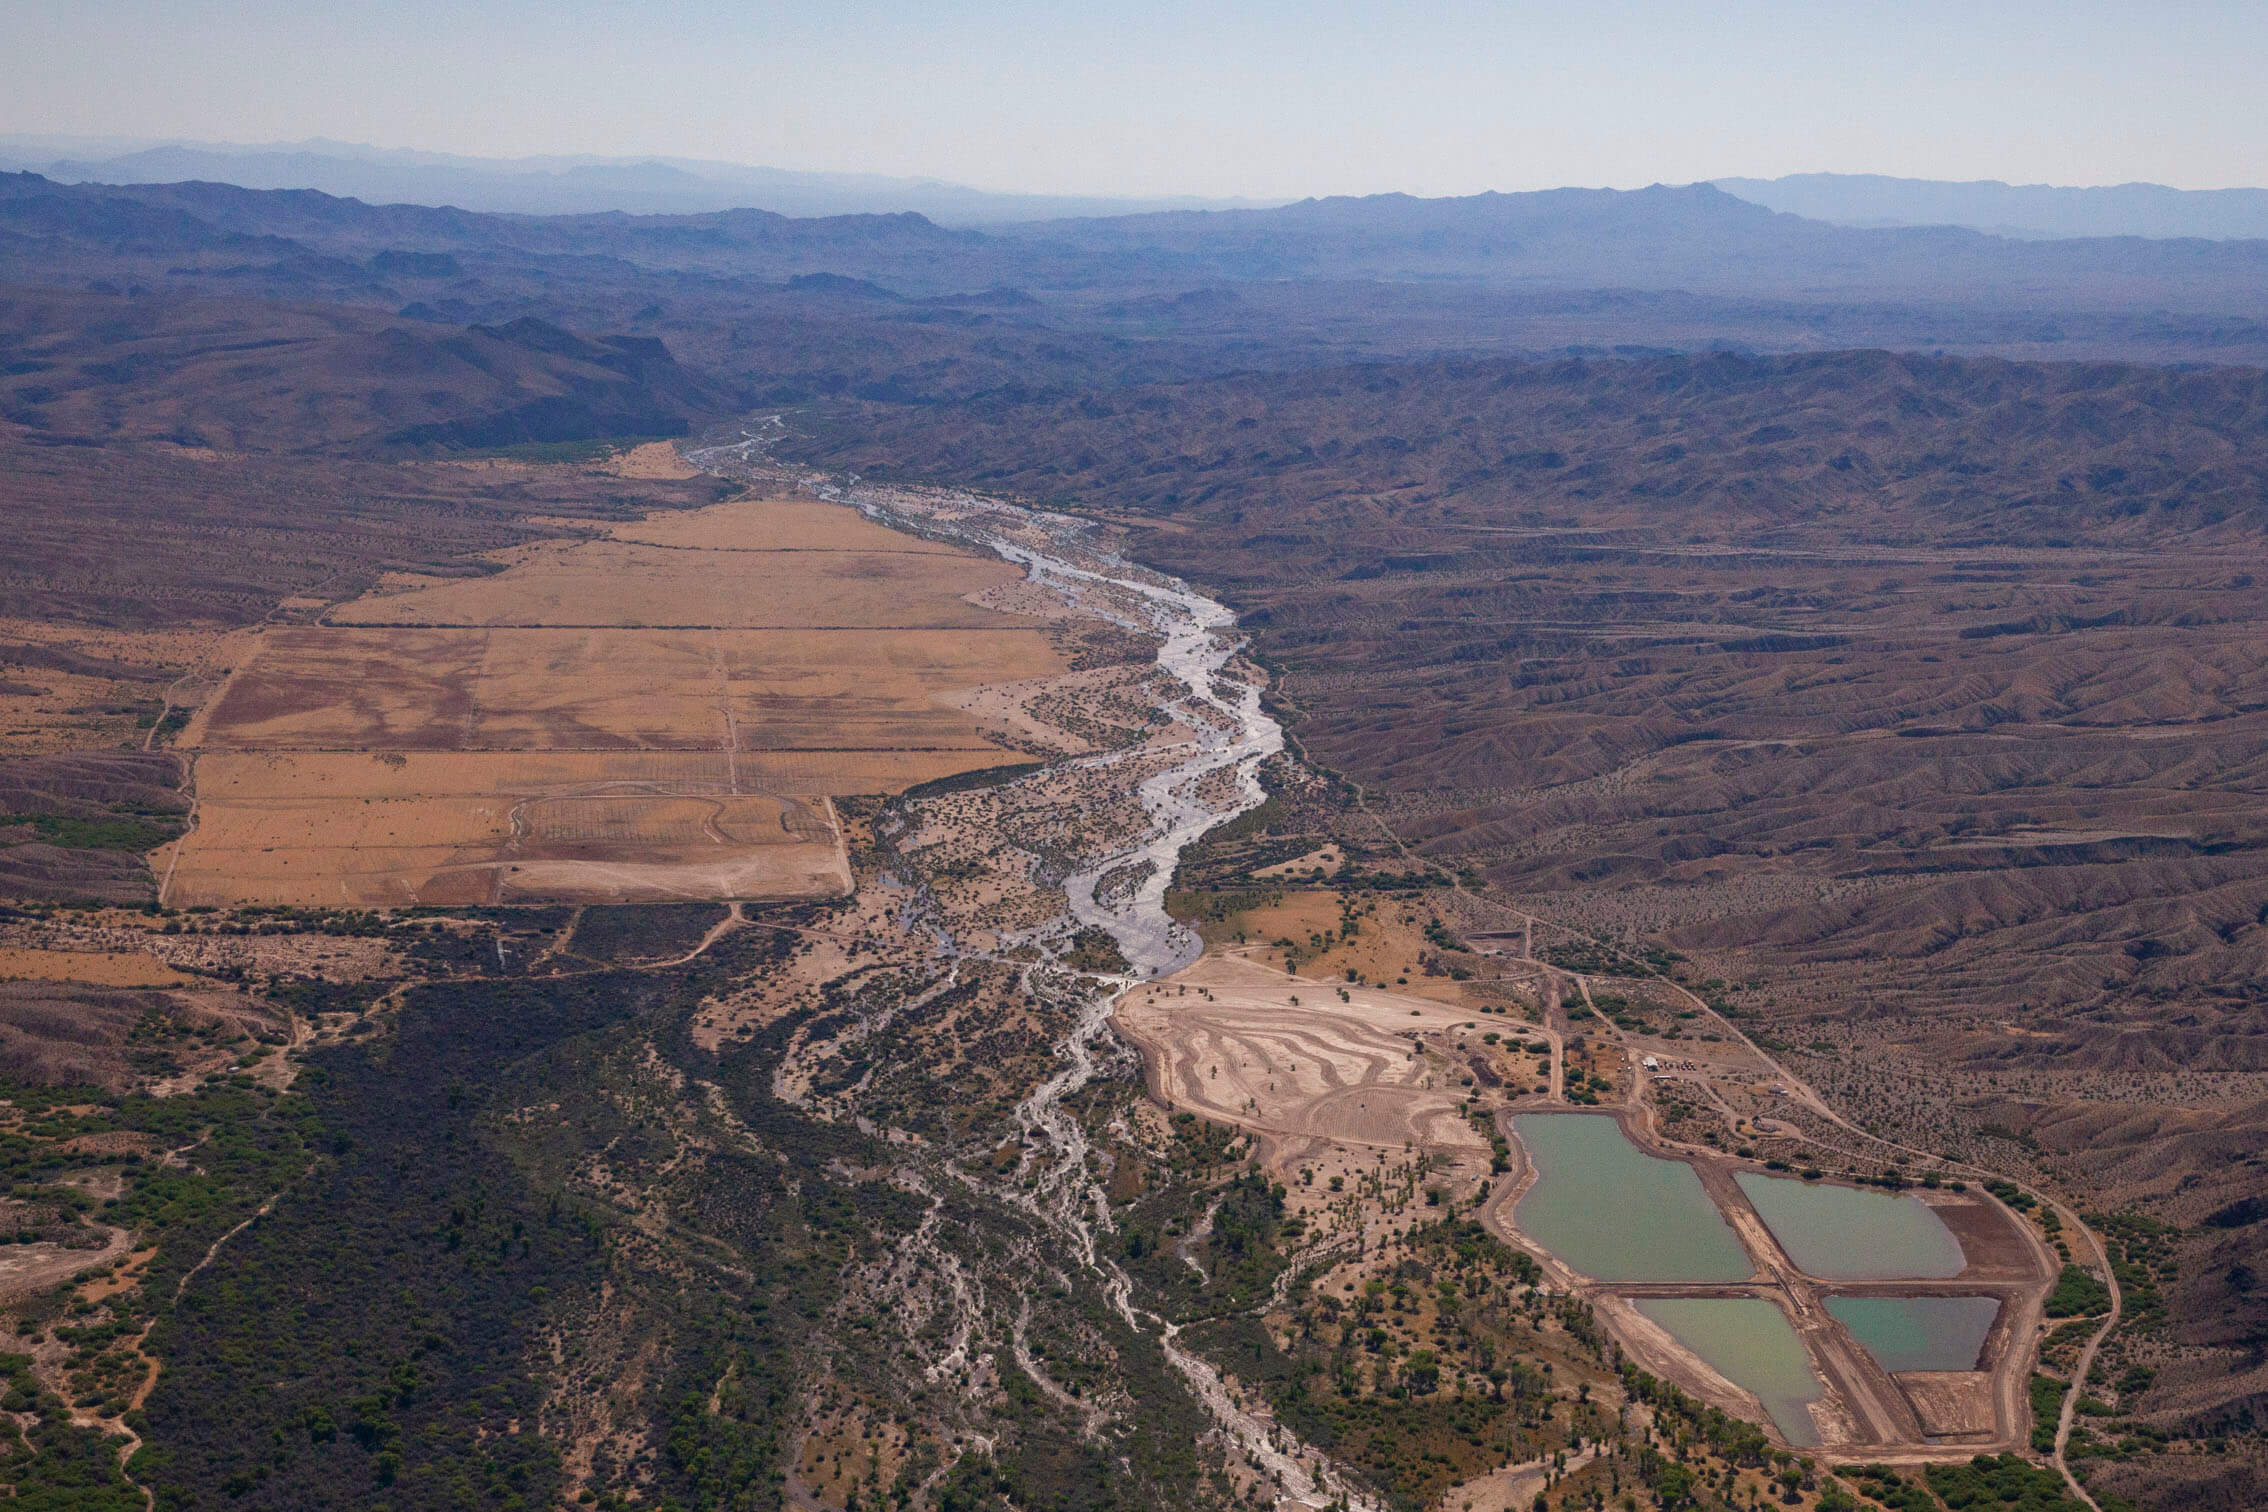 The Bill Williams River and floodplain during a time of high release from Alamo Dam. High flows in the Bill Williams are critical for renewing riparian forest and maintaining channel habitat. The river and its aquifer support conservation projects managed by federal and state partners, including ponds (lower right) for rearing native fish.